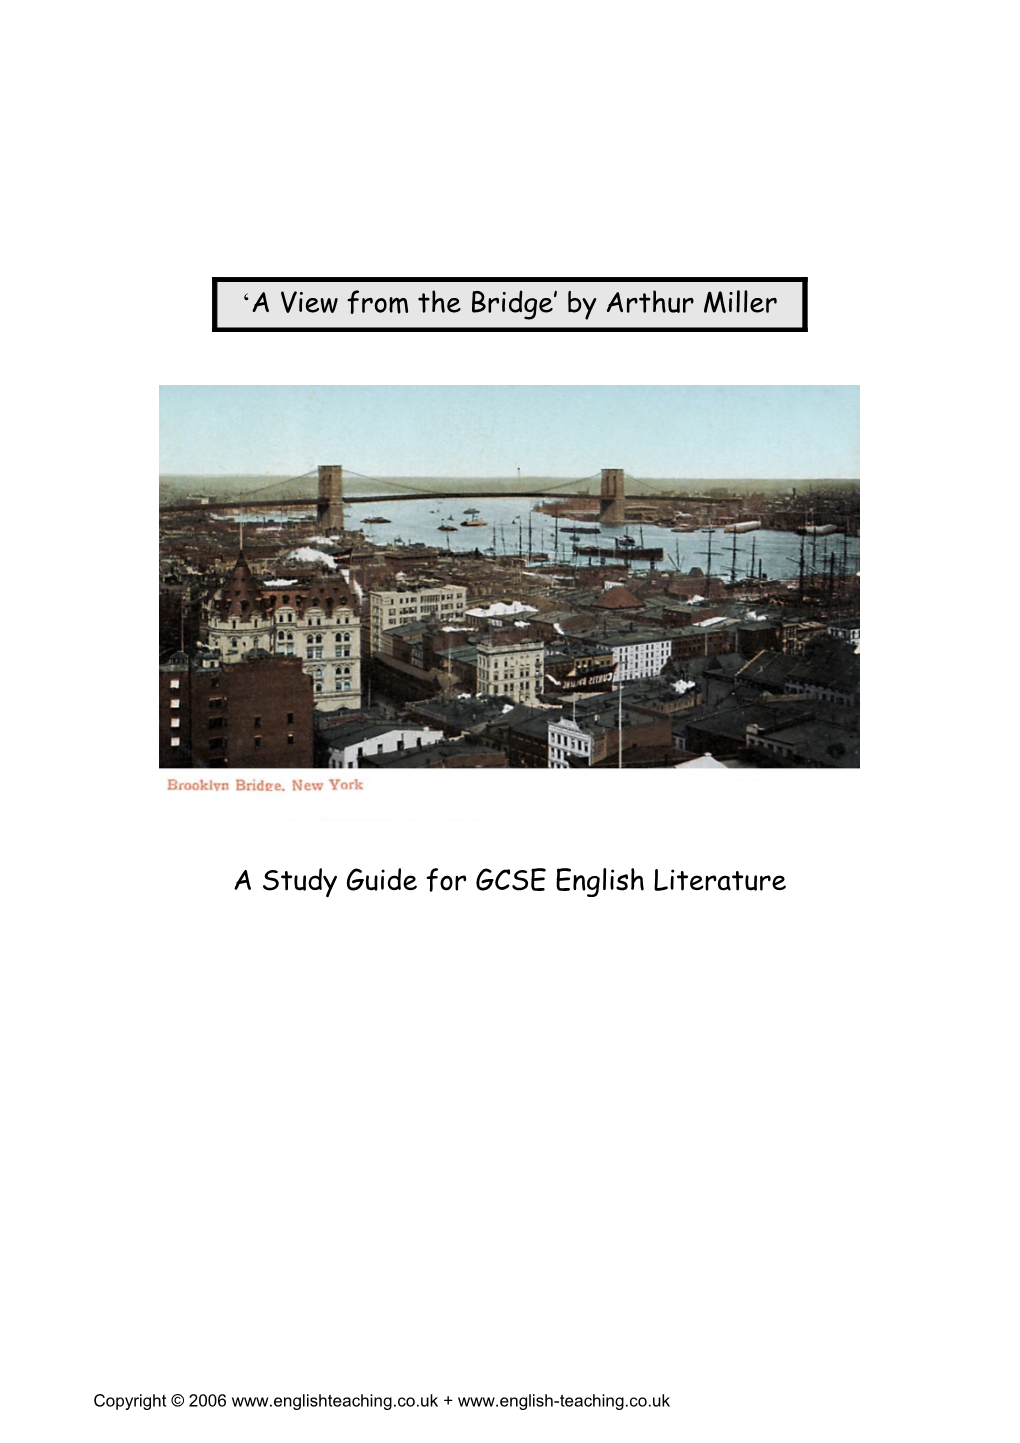 GCSE Drama: a View from the Bridge by Arthur Miller